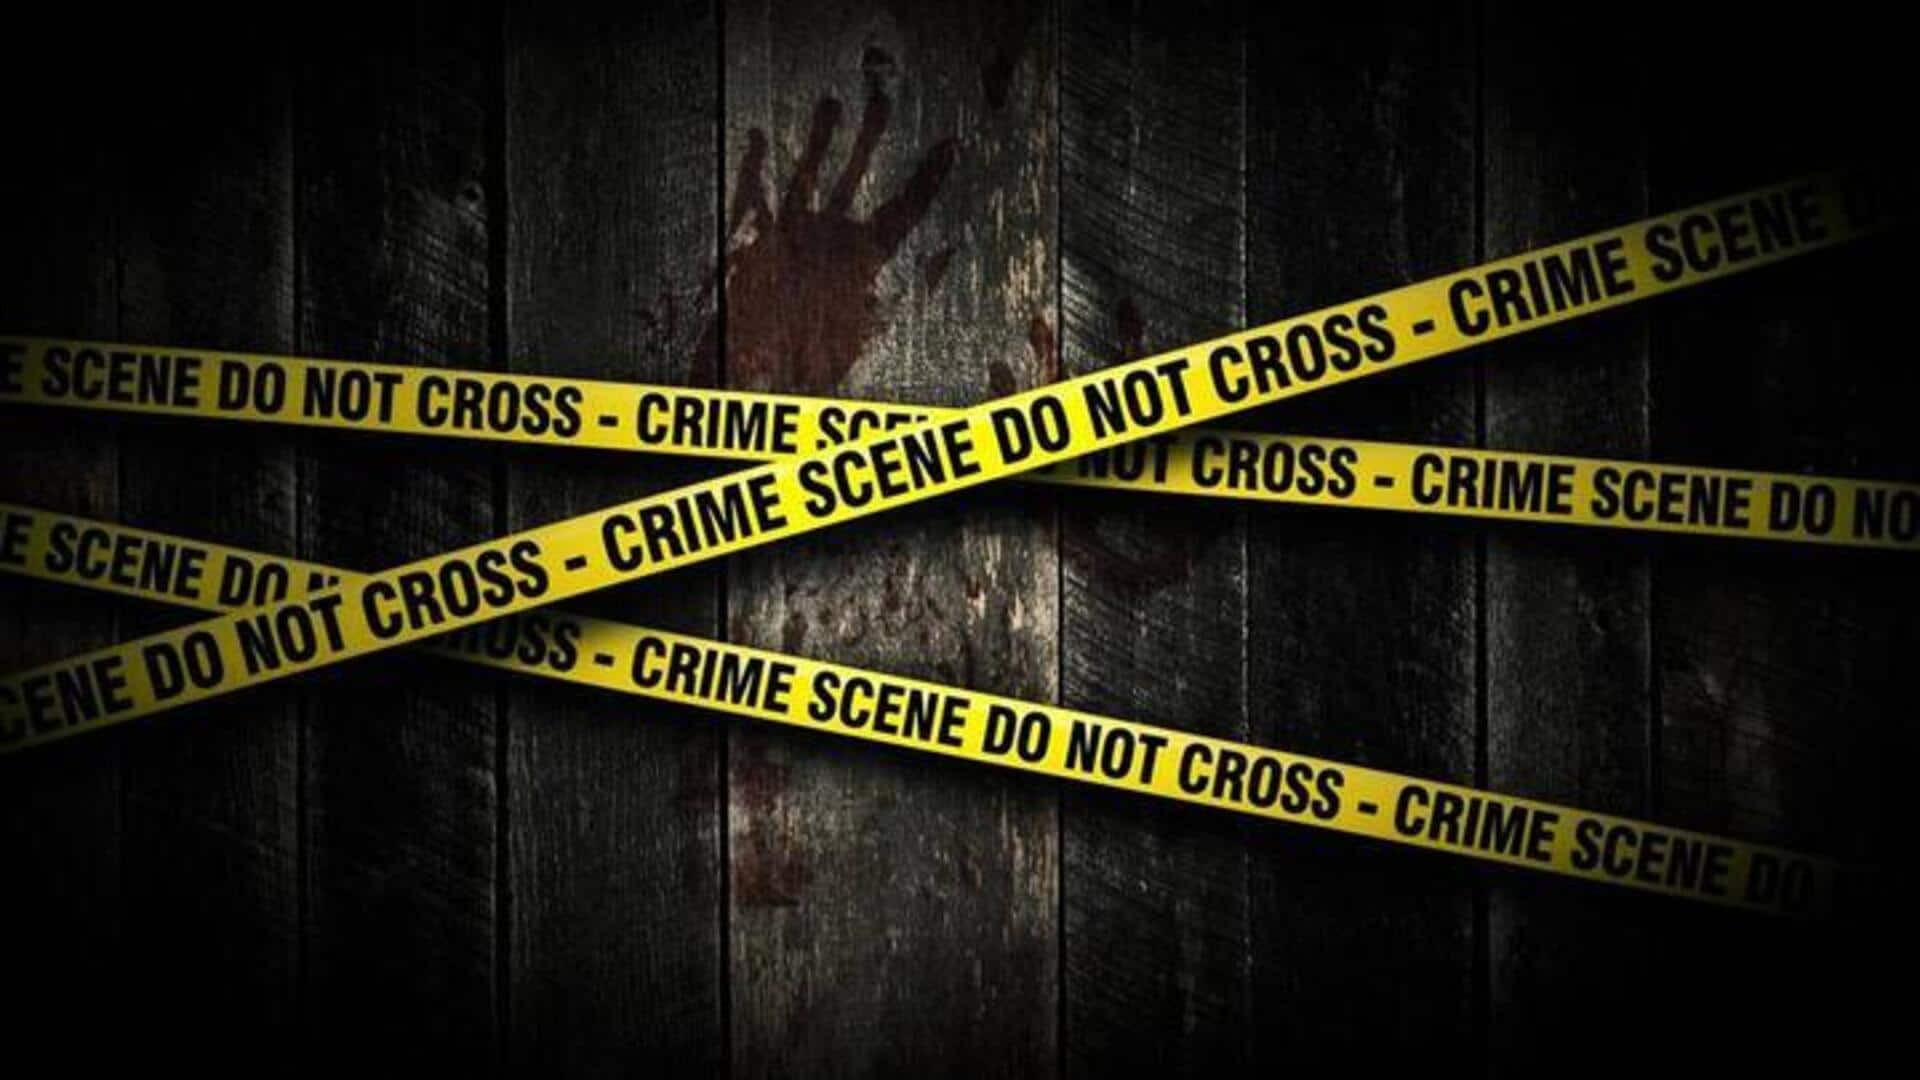 Bhopal man strangles wife, burns and buries body, suspecting affair 